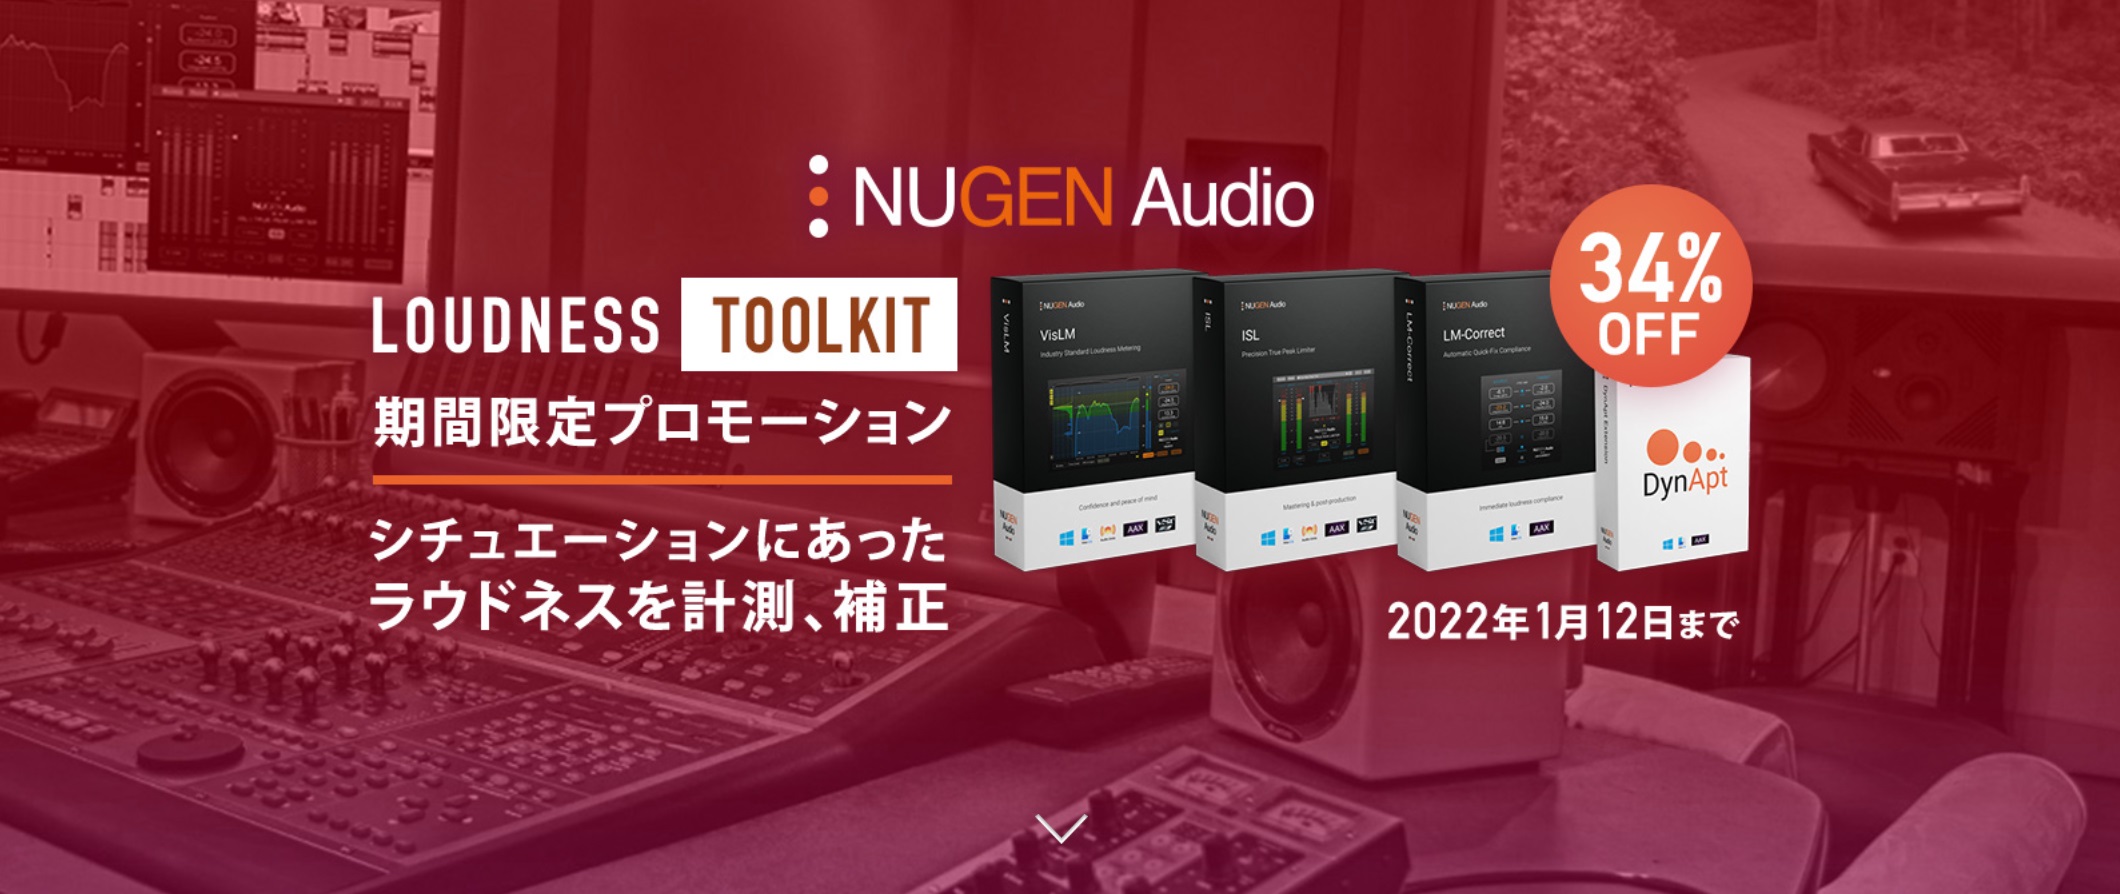 【DTM】NuGen Audio Loudness Toolkit 期間限定プロモーション 2021